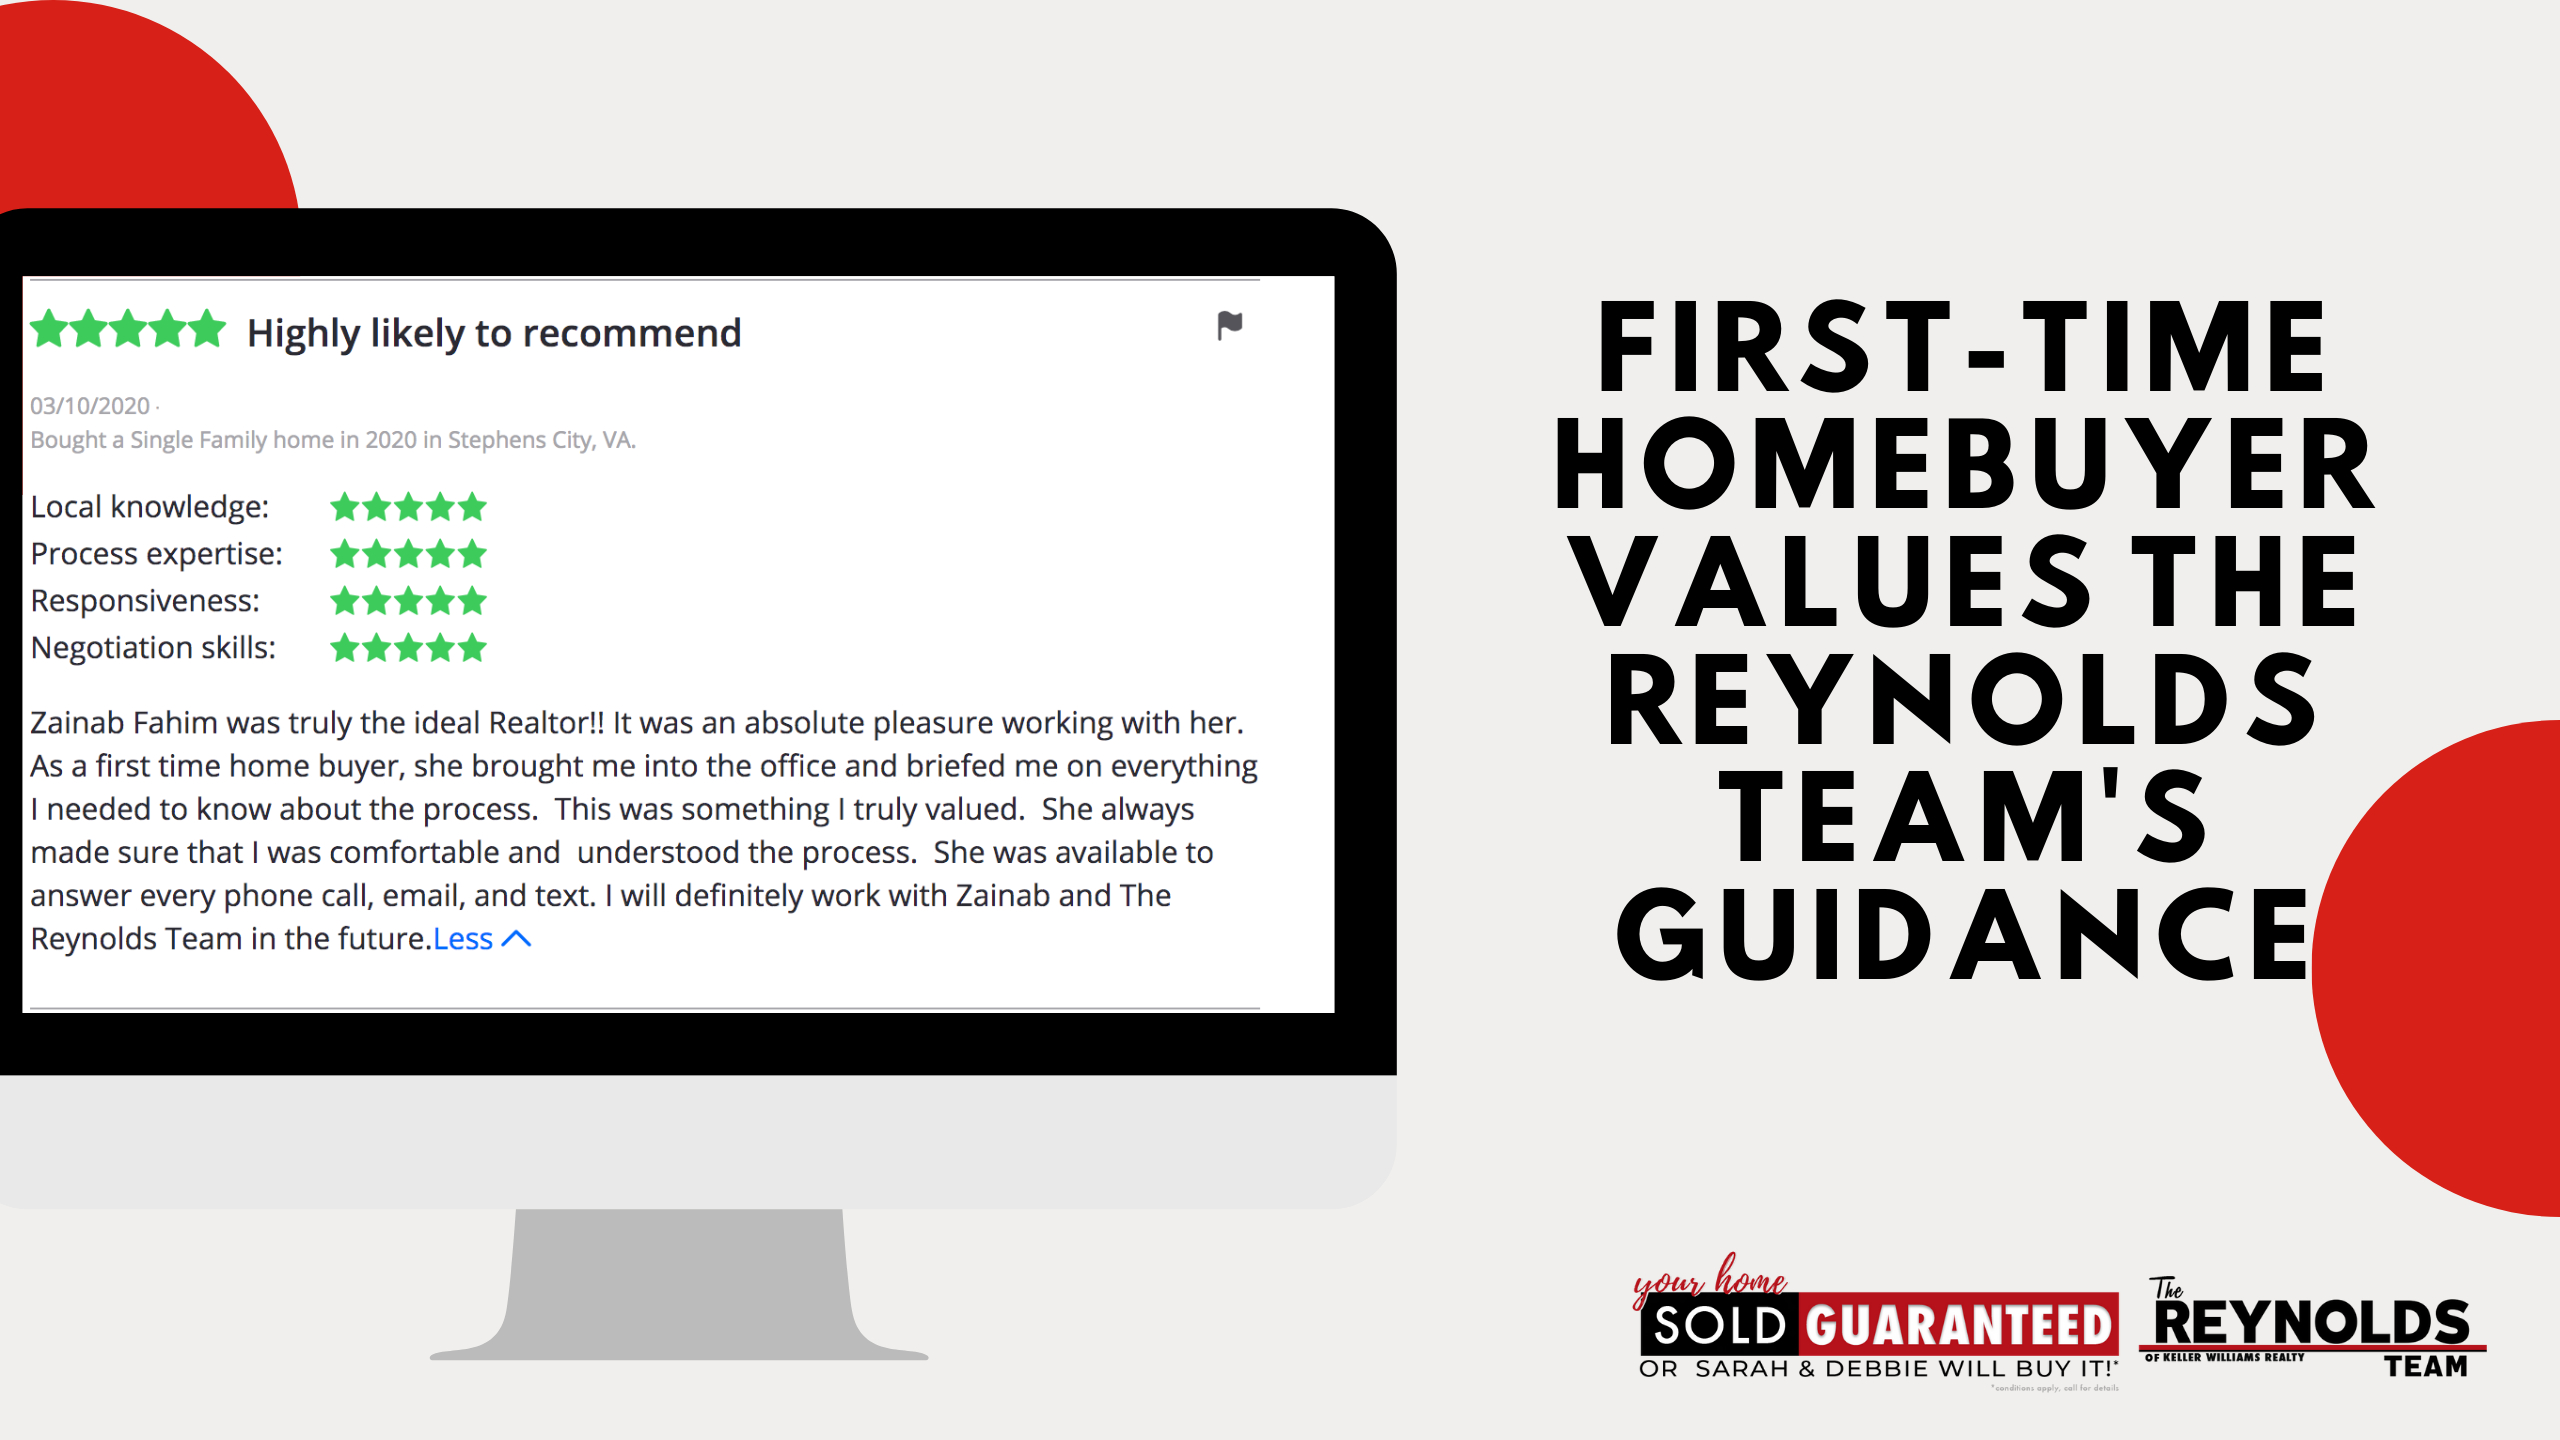 First-time Homebuyer Values The Reynolds Team’s Guidance